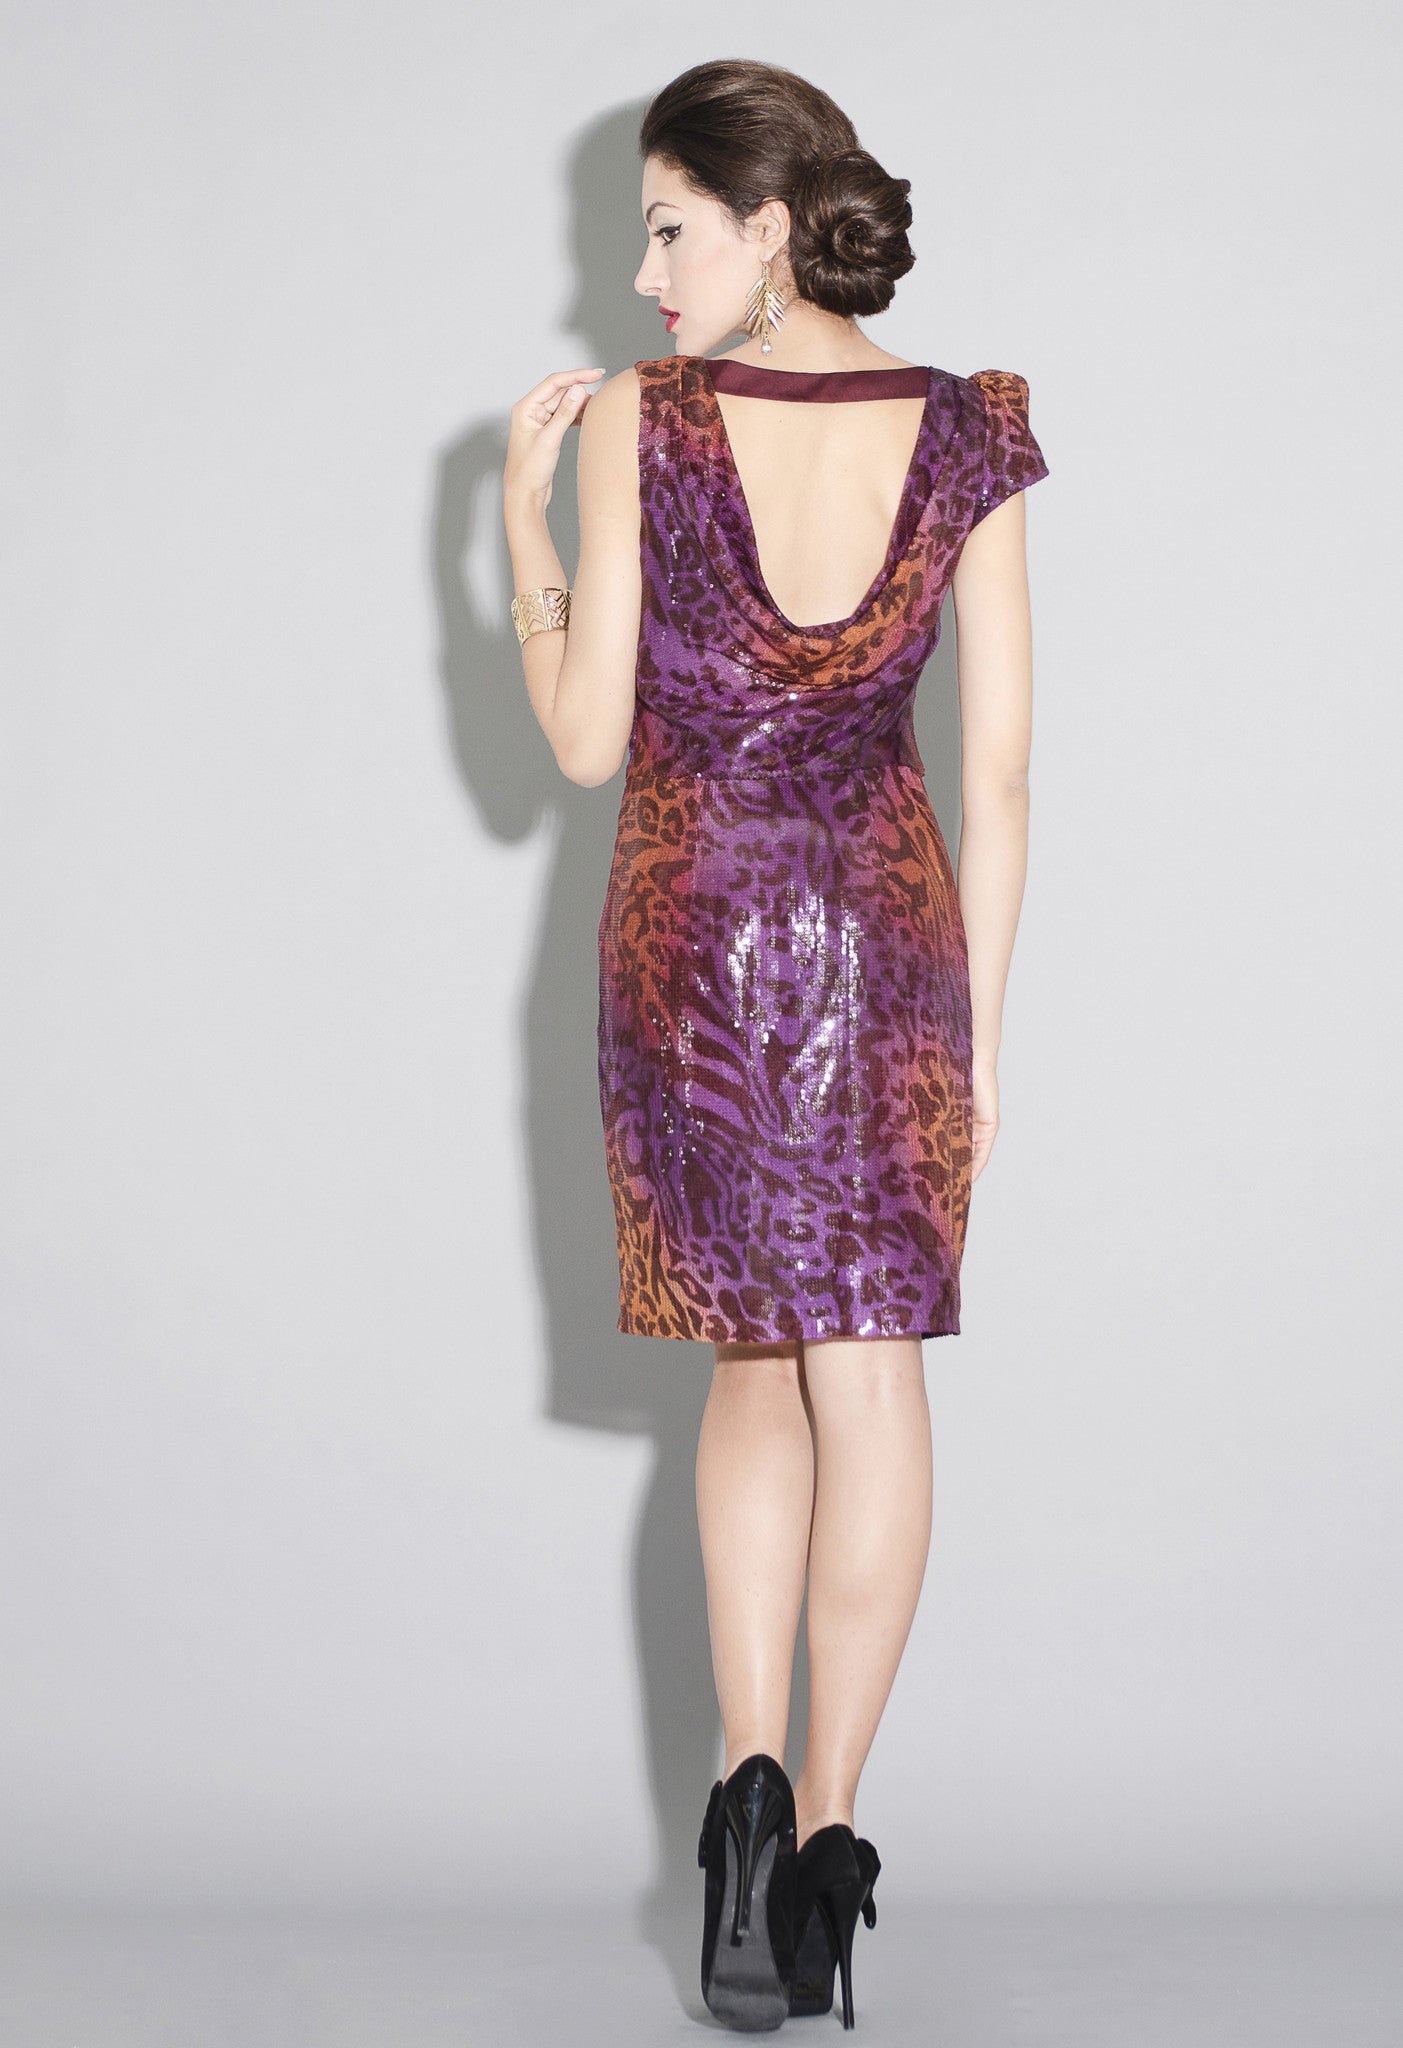 All over sequins leapord print ombre party dress- SOLD OUT